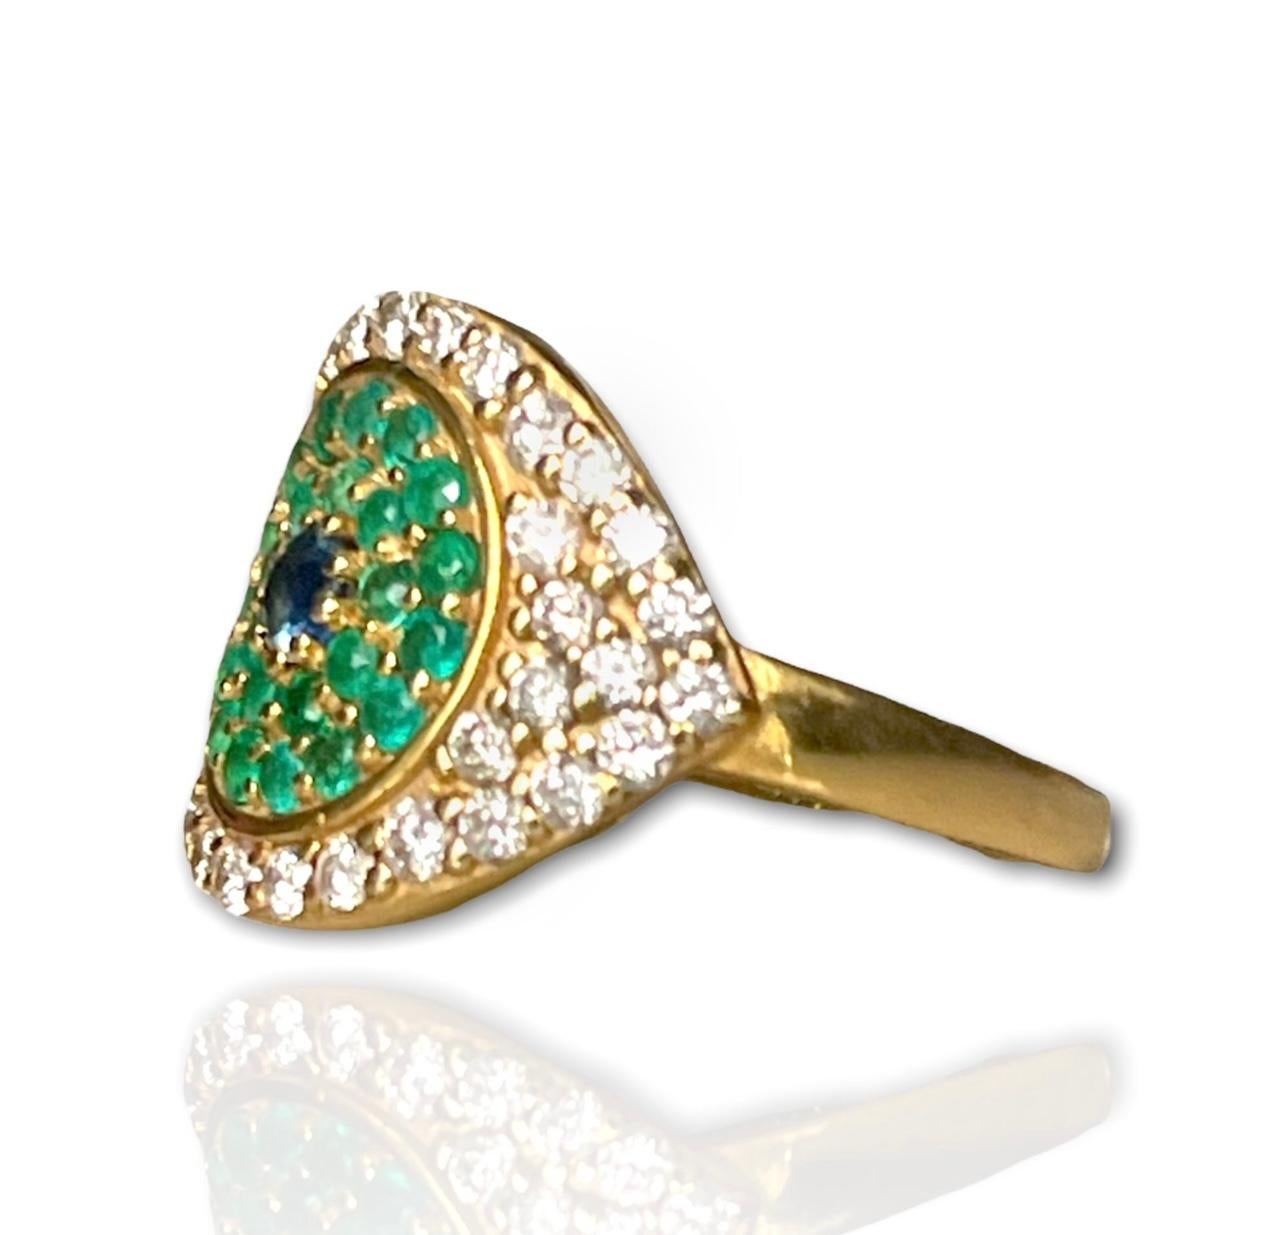 For Sale:  Large Eye Ring with Diamonds and Emeralds in Gold in stock 2